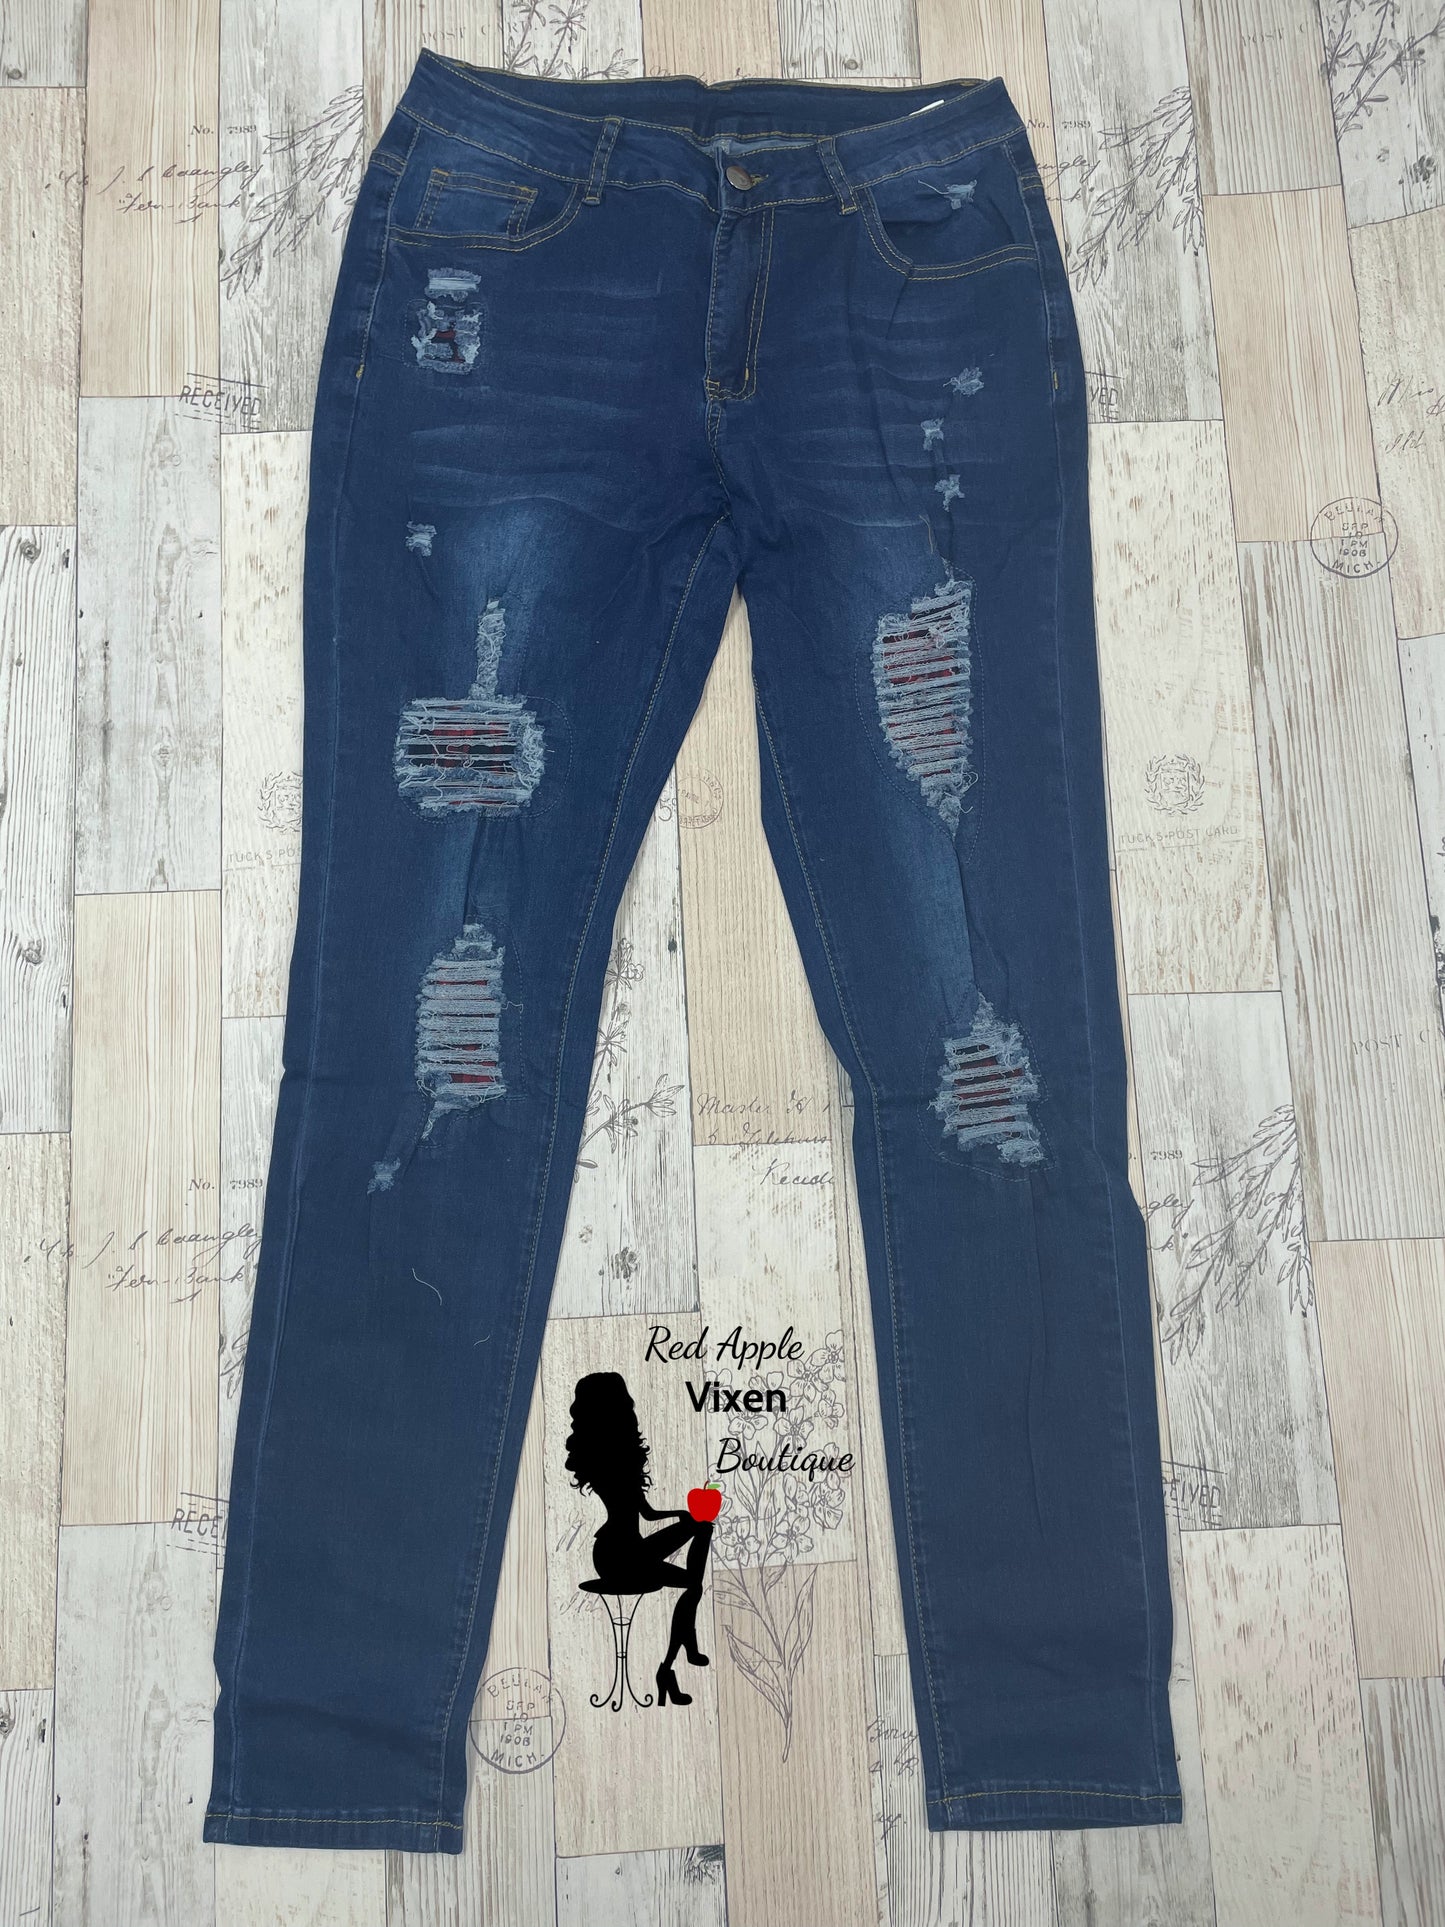 Distressed Skinny Jeans with Plaid Patches - Red Apple Vixen Boutique